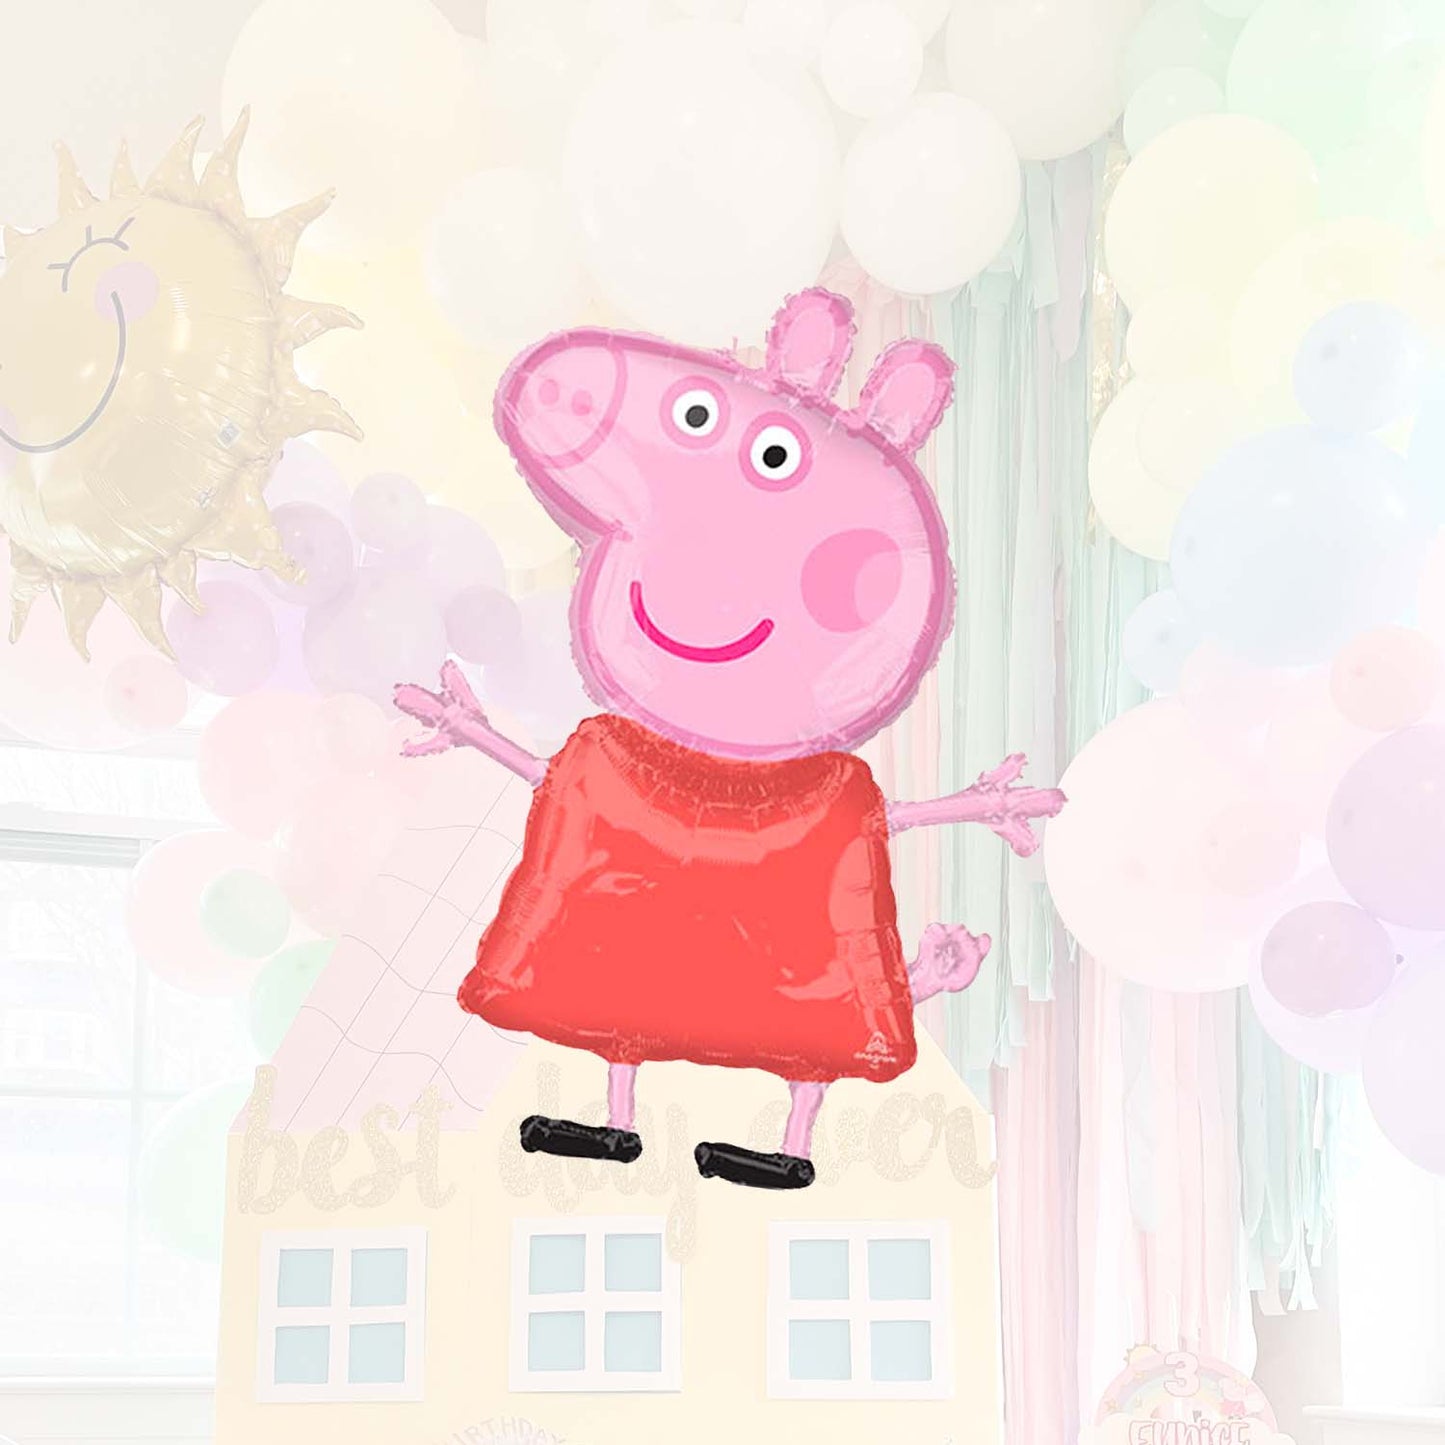 Peppa Pig Mylar Foil Party Balloon (32 In.) from Ellie's Party Supply